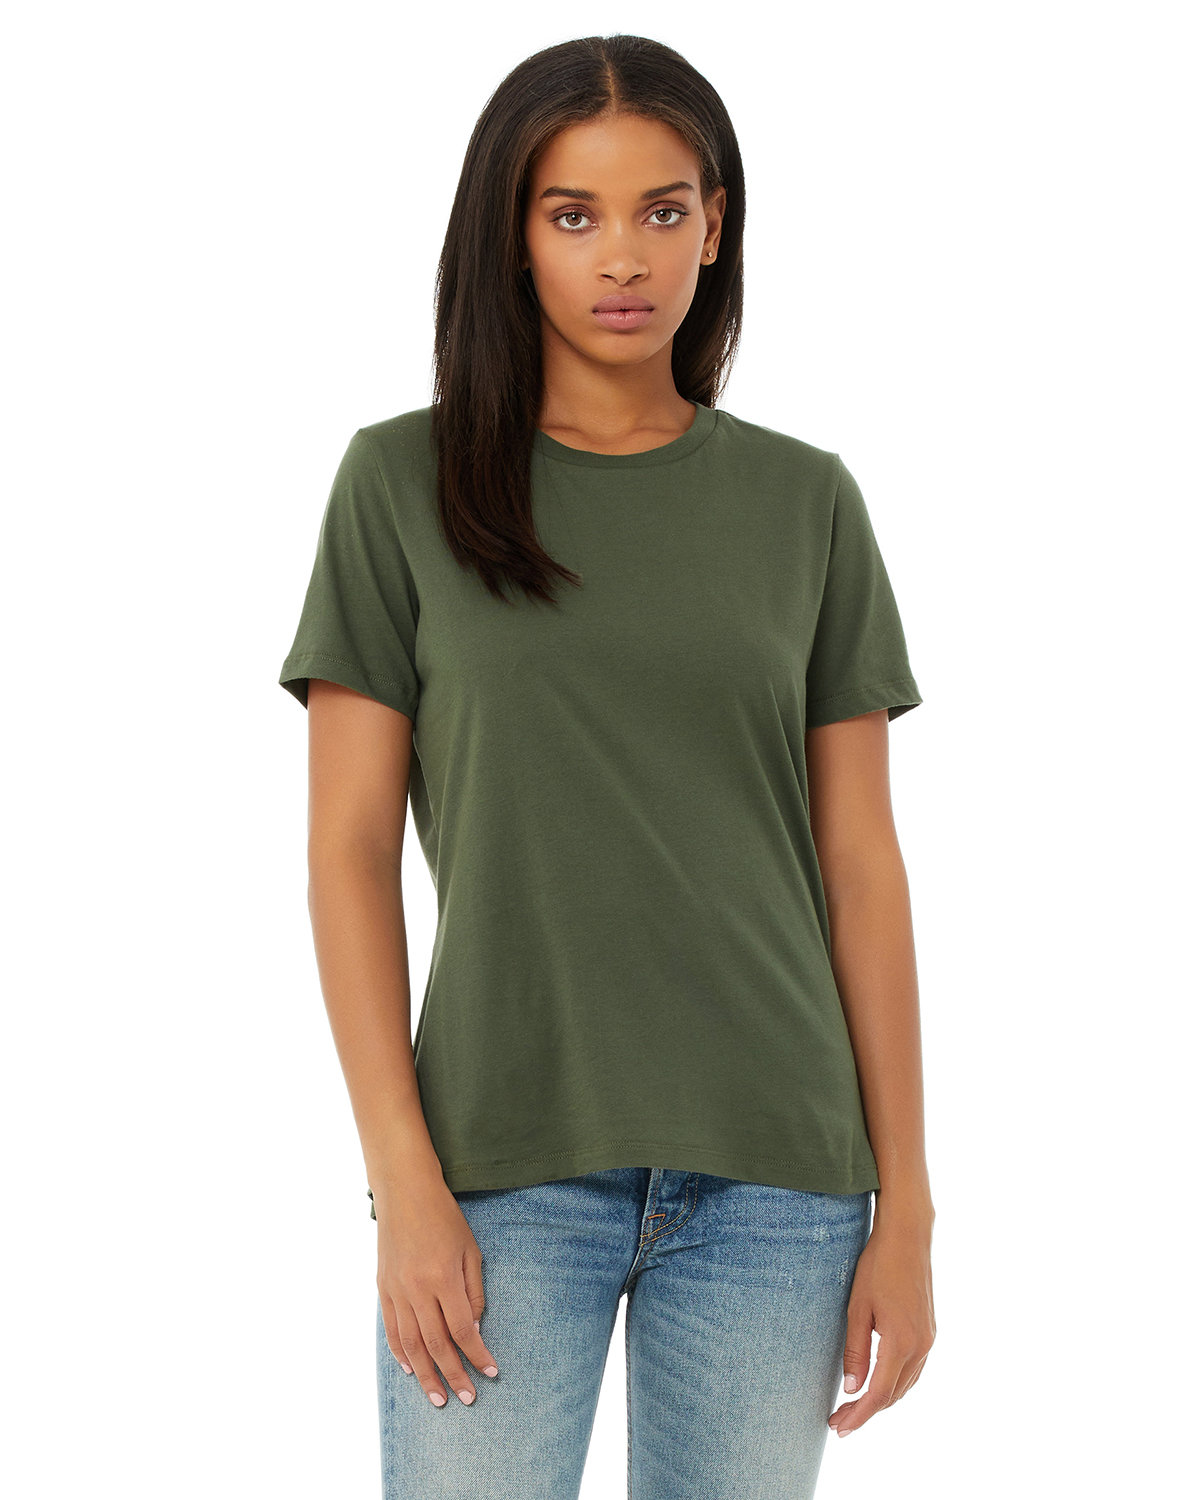 Bella + Canvas Ladies' Relaxed Jersey Short-Sleeve T-Shirt MILITARY GREEN 